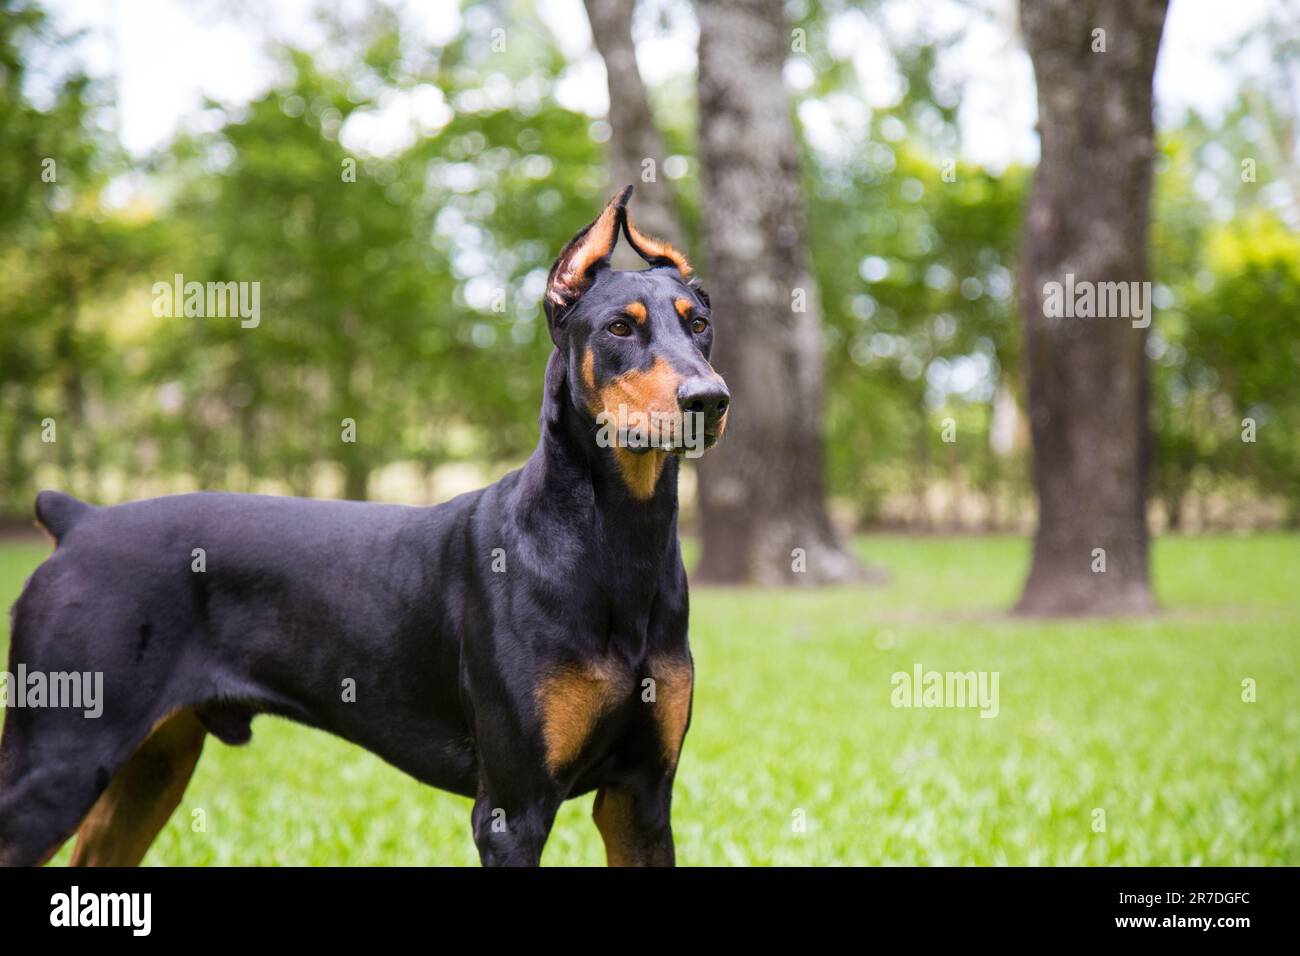 An energetic, Dobermann dog stands in a lush, green pasture surrounded by trees, soaking in the sun Stock Photo